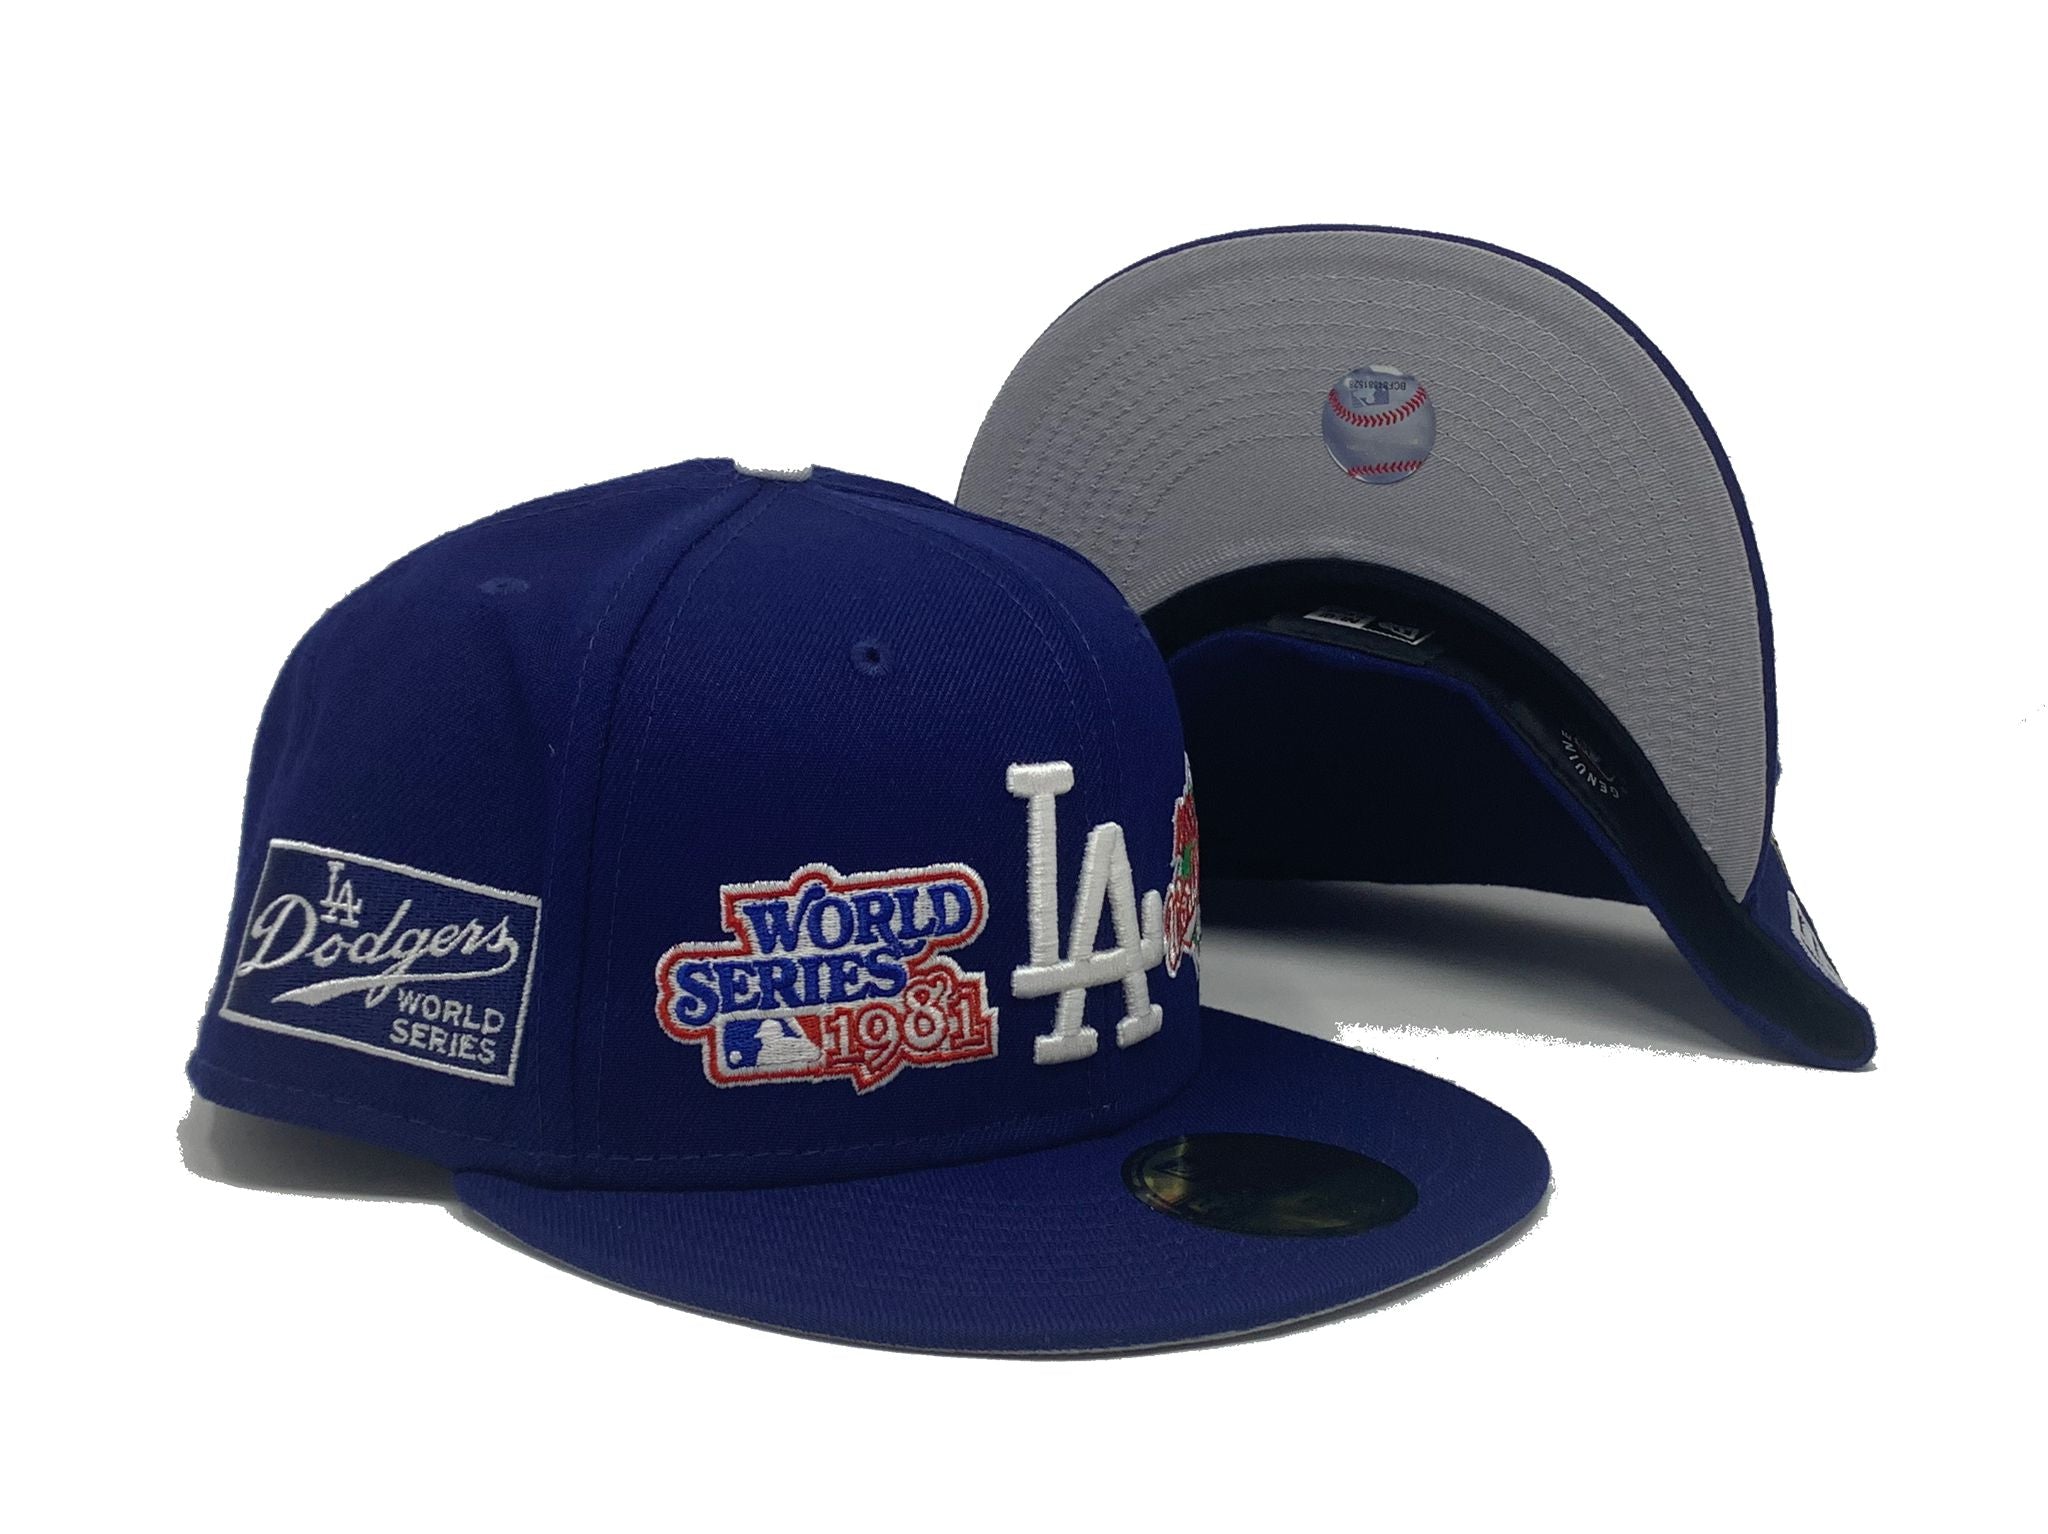 LOS ANGELES DODGERS 7X WORLD SERIES CHAMPIONS GRAY BRIM NEWERA FITTED ...